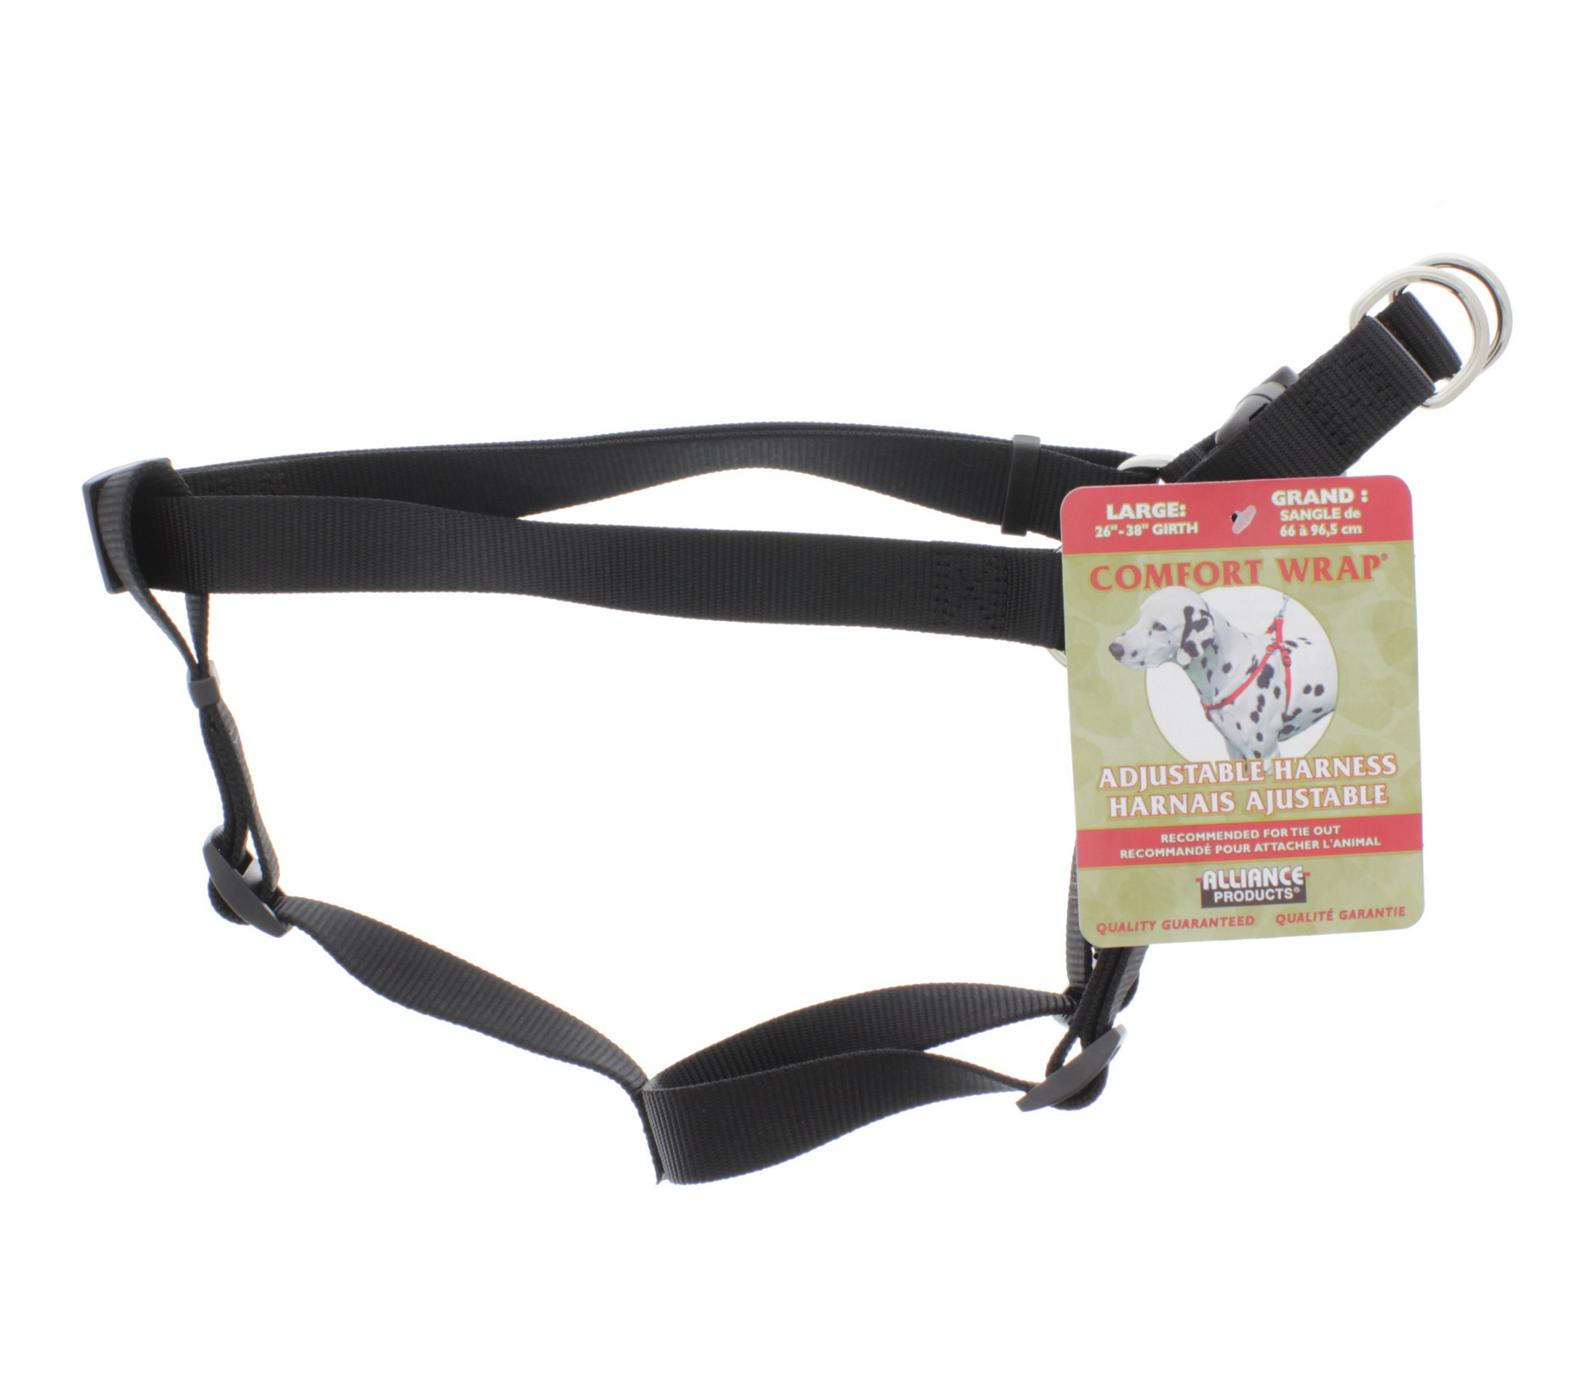 Alliance Comfort Wrap Large Harness Assorted Colors; image 3 of 3